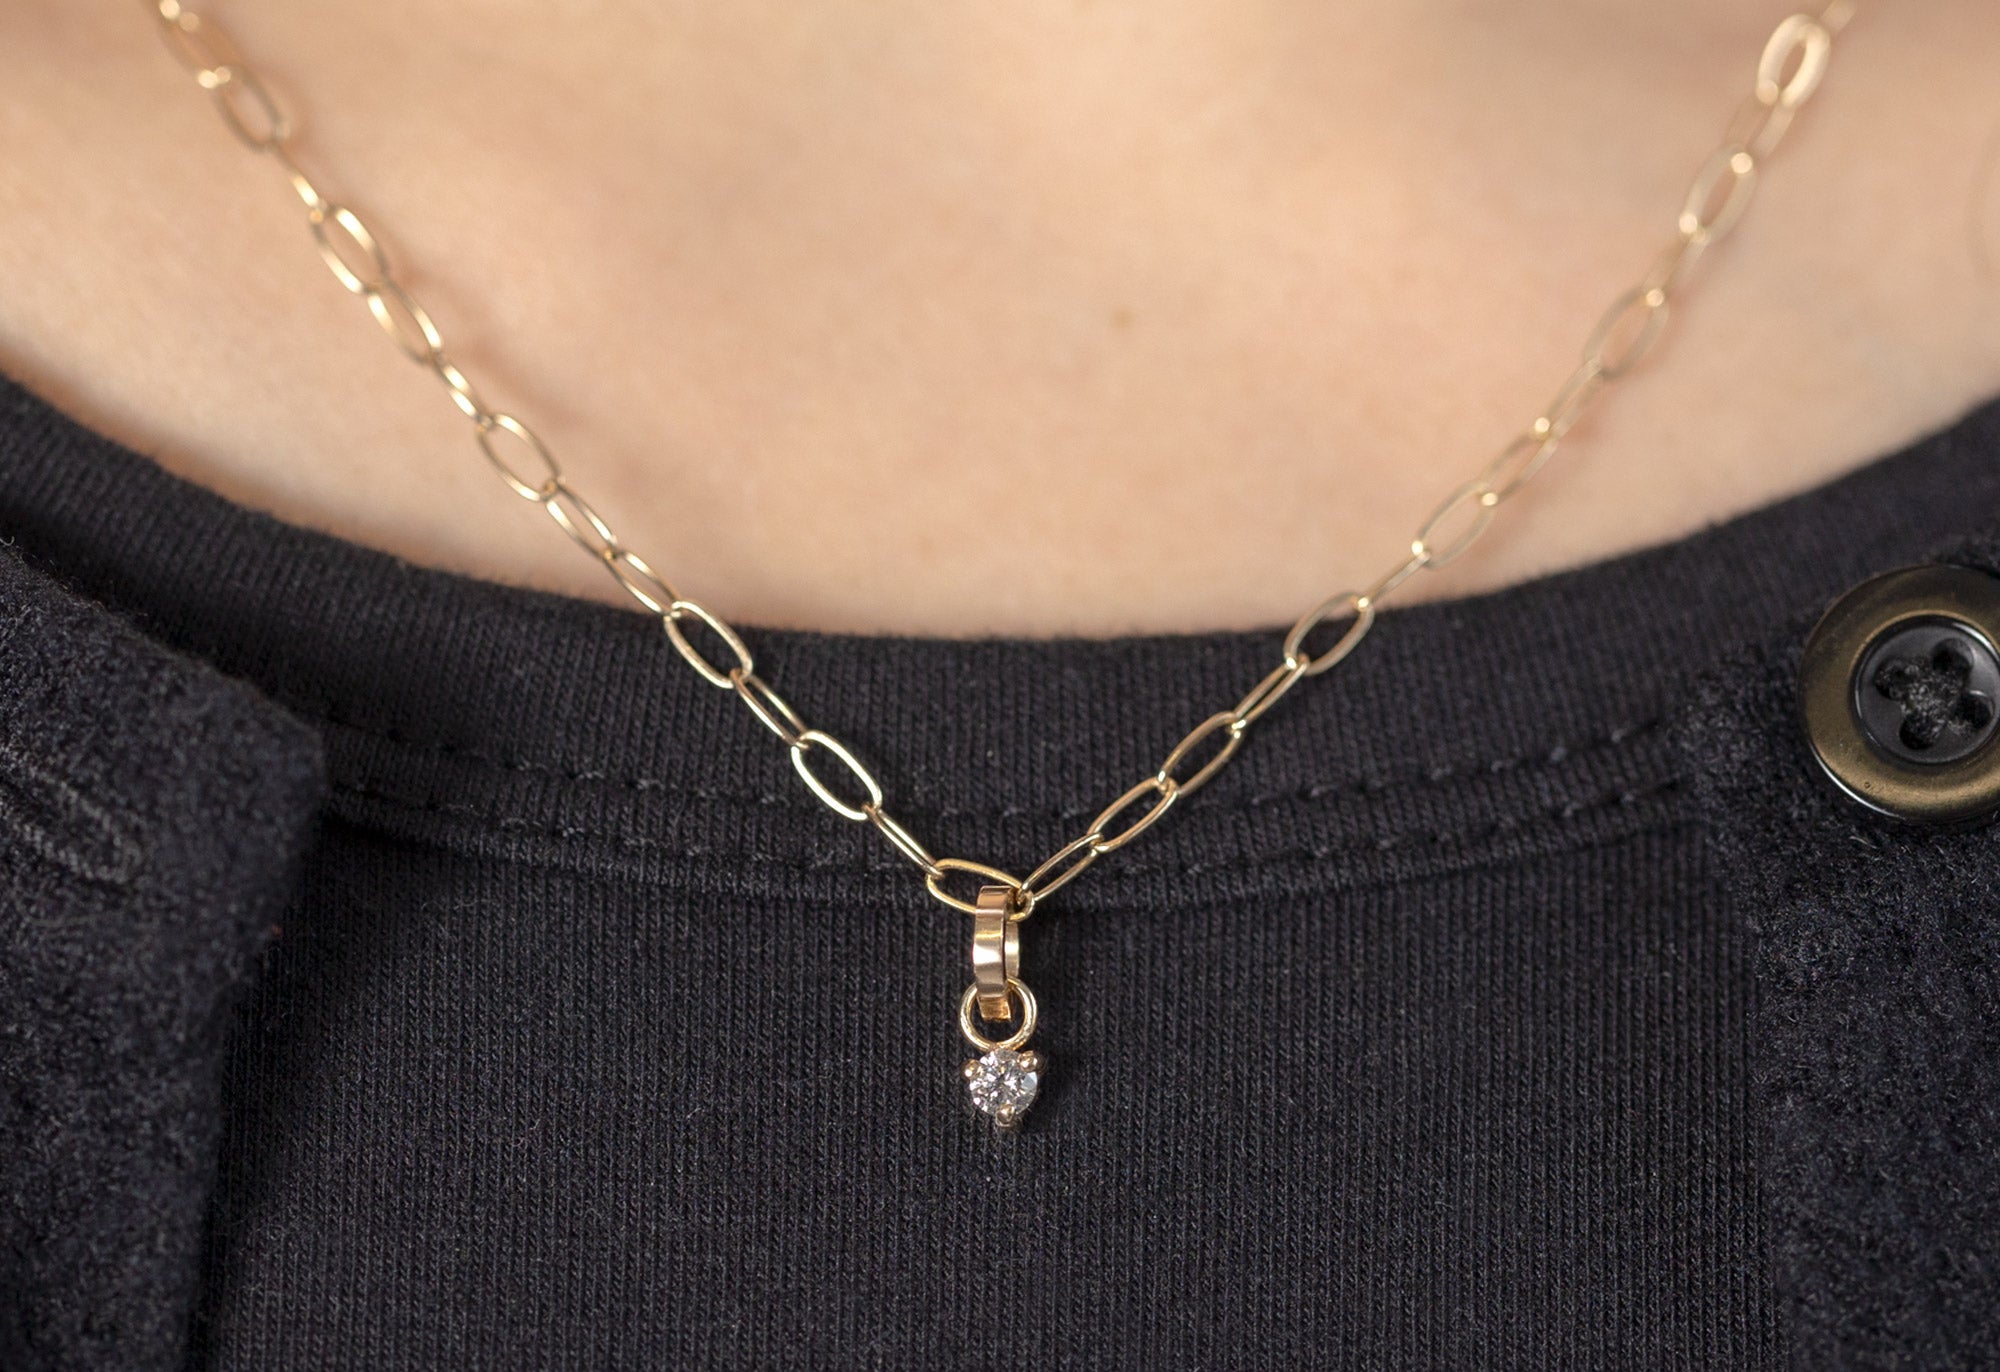 The Drawn Cable Chain Charm Necklace